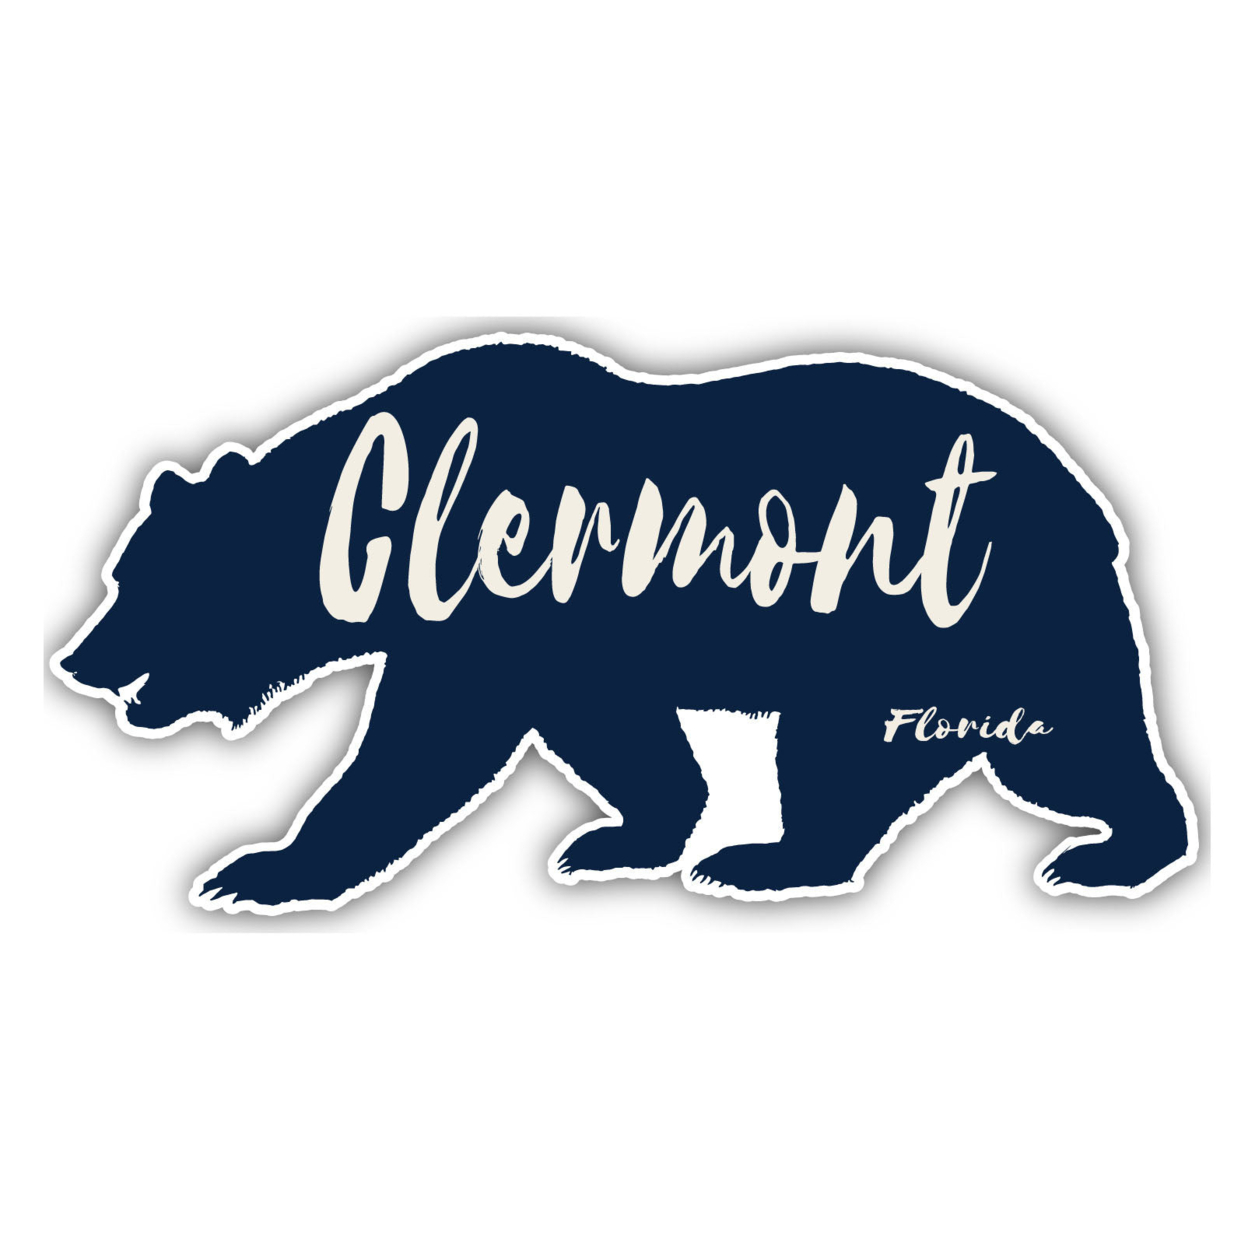 Clermont Florida Souvenir Decorative Stickers (Choose Theme And Size) - 4-Pack, 2-Inch, Bear